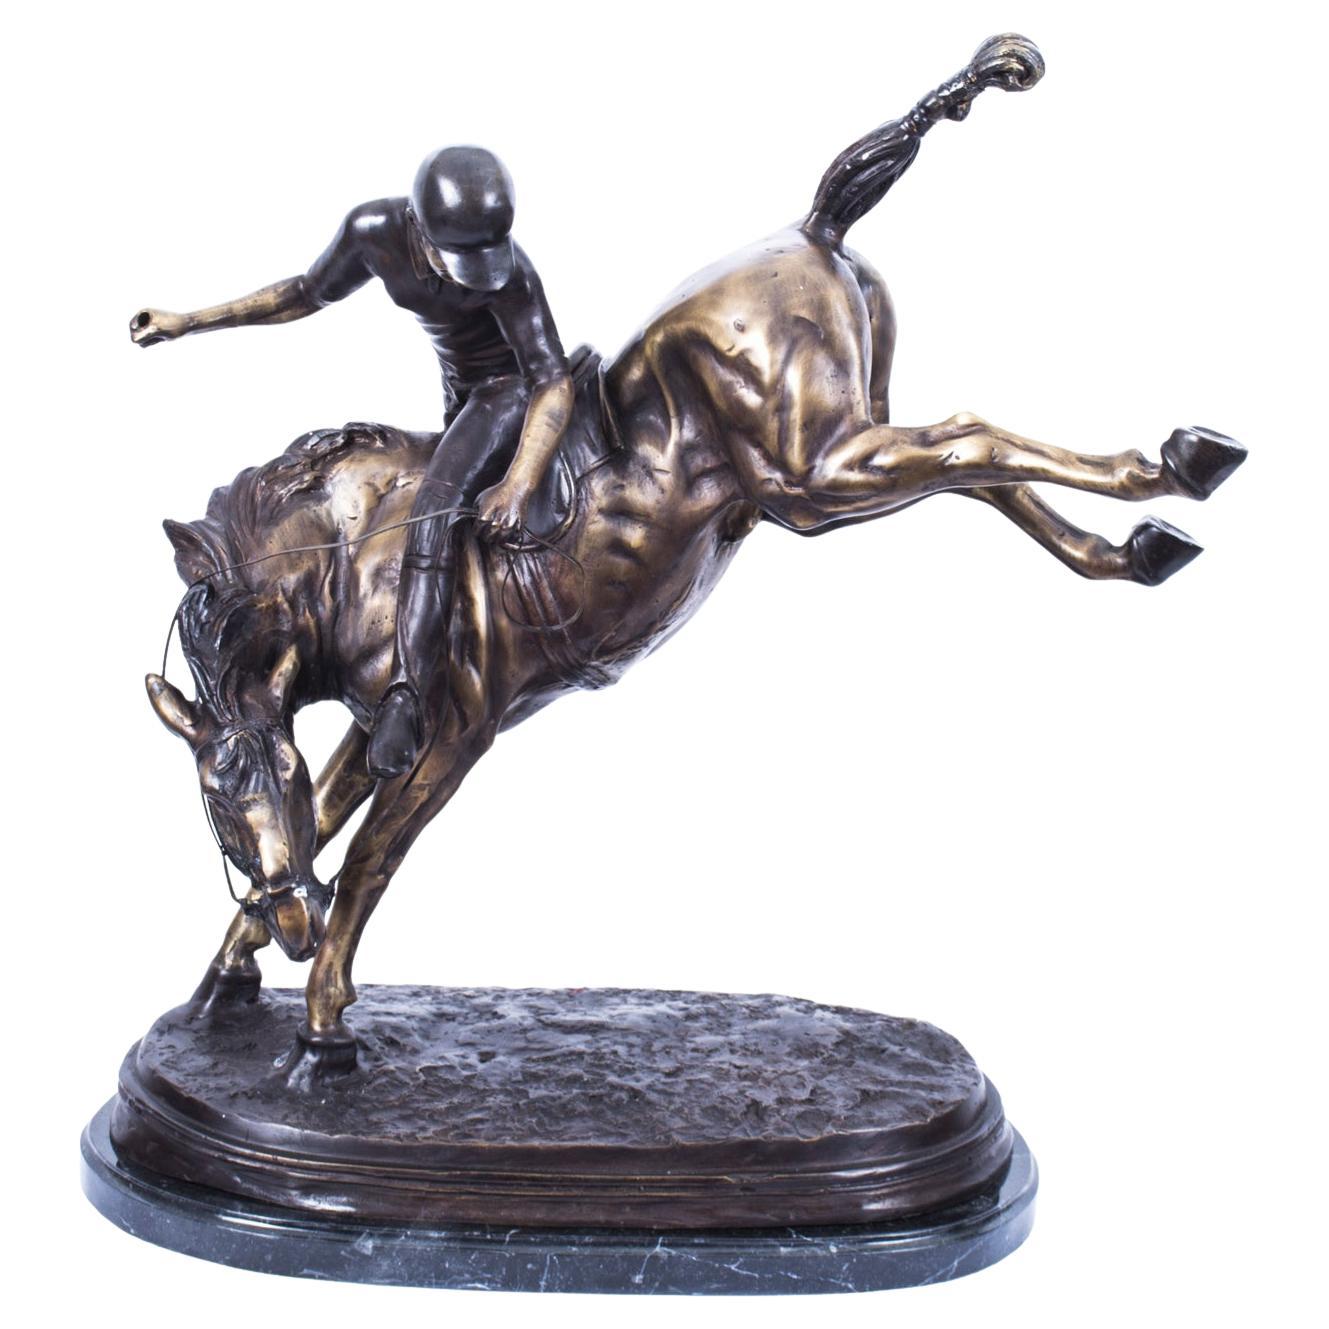 Vintage Bronze Polo Player Bucking a Horse Sculpture 20th Century